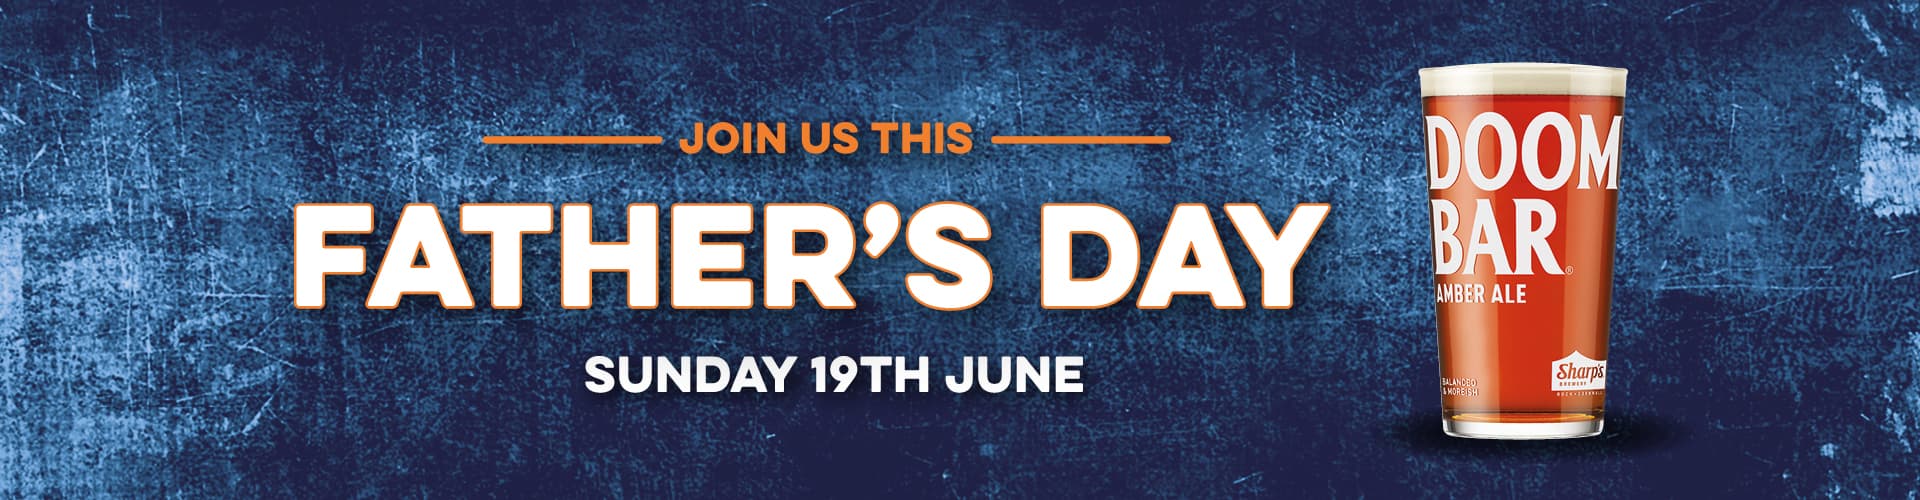 Father's Day at Farmers Arms Hotel pub in Liverpool